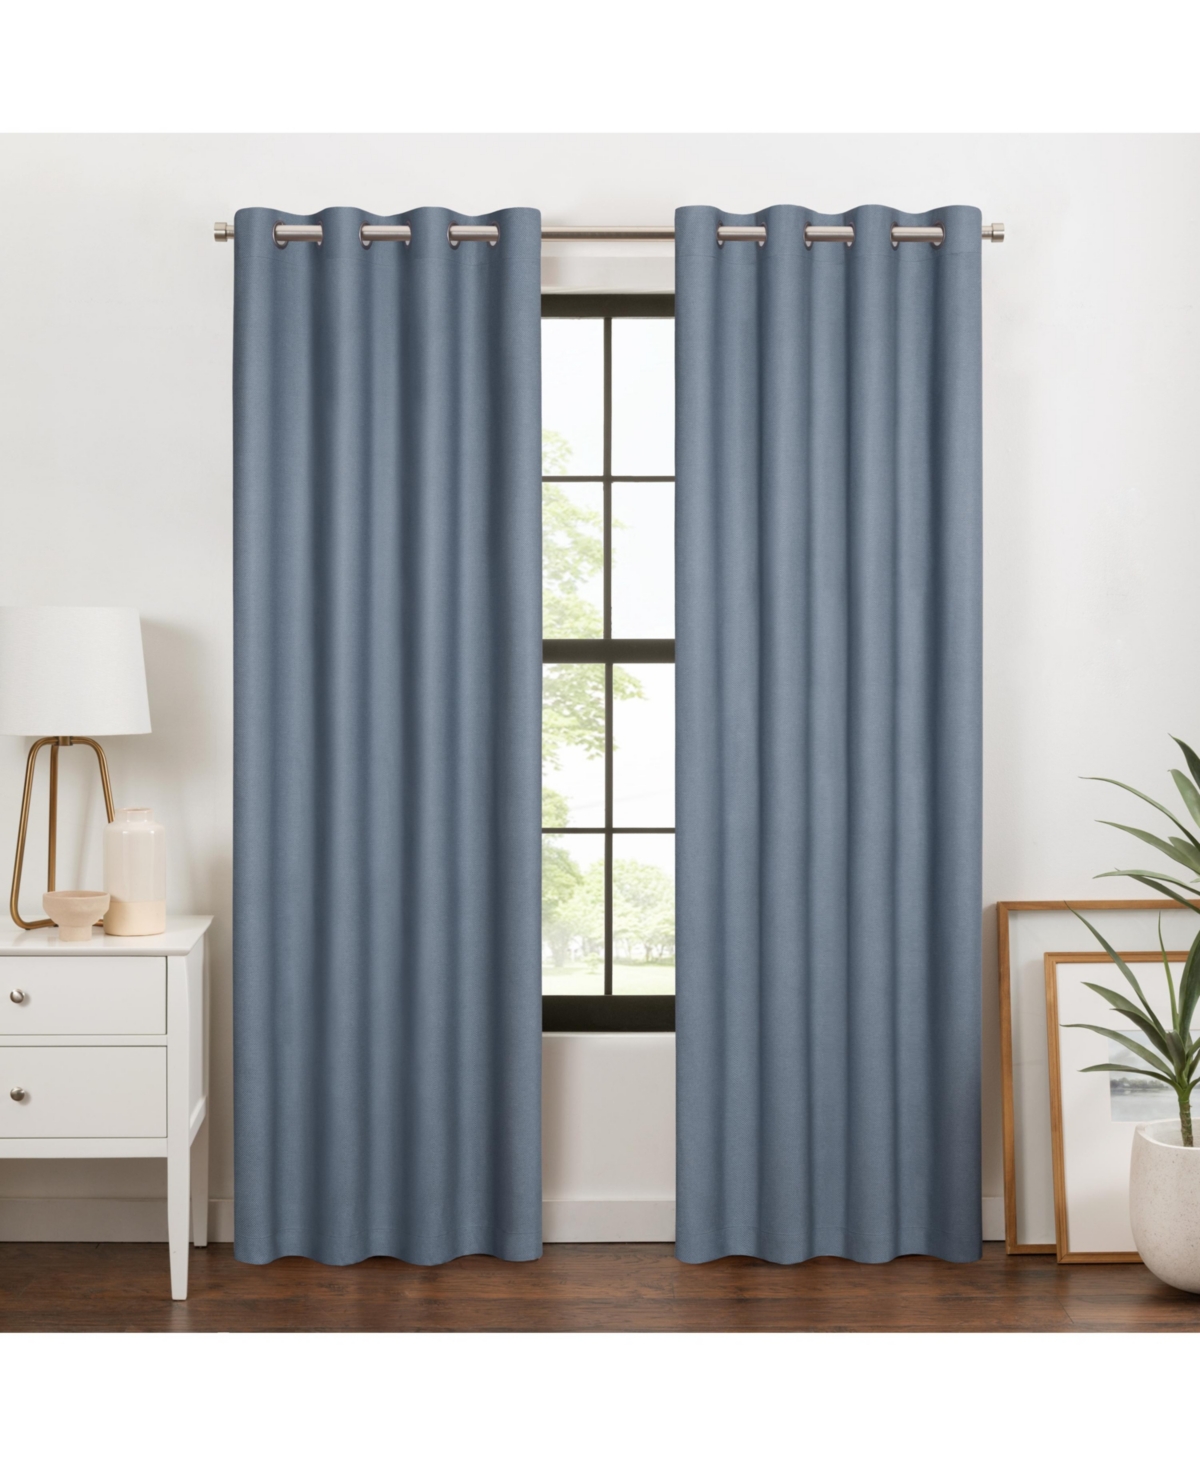 100% Blackout Curtain, Larissa Solid Grommet Curtain, 84 in Long x 50 in Wide, Textured, Sky Blue - Blue